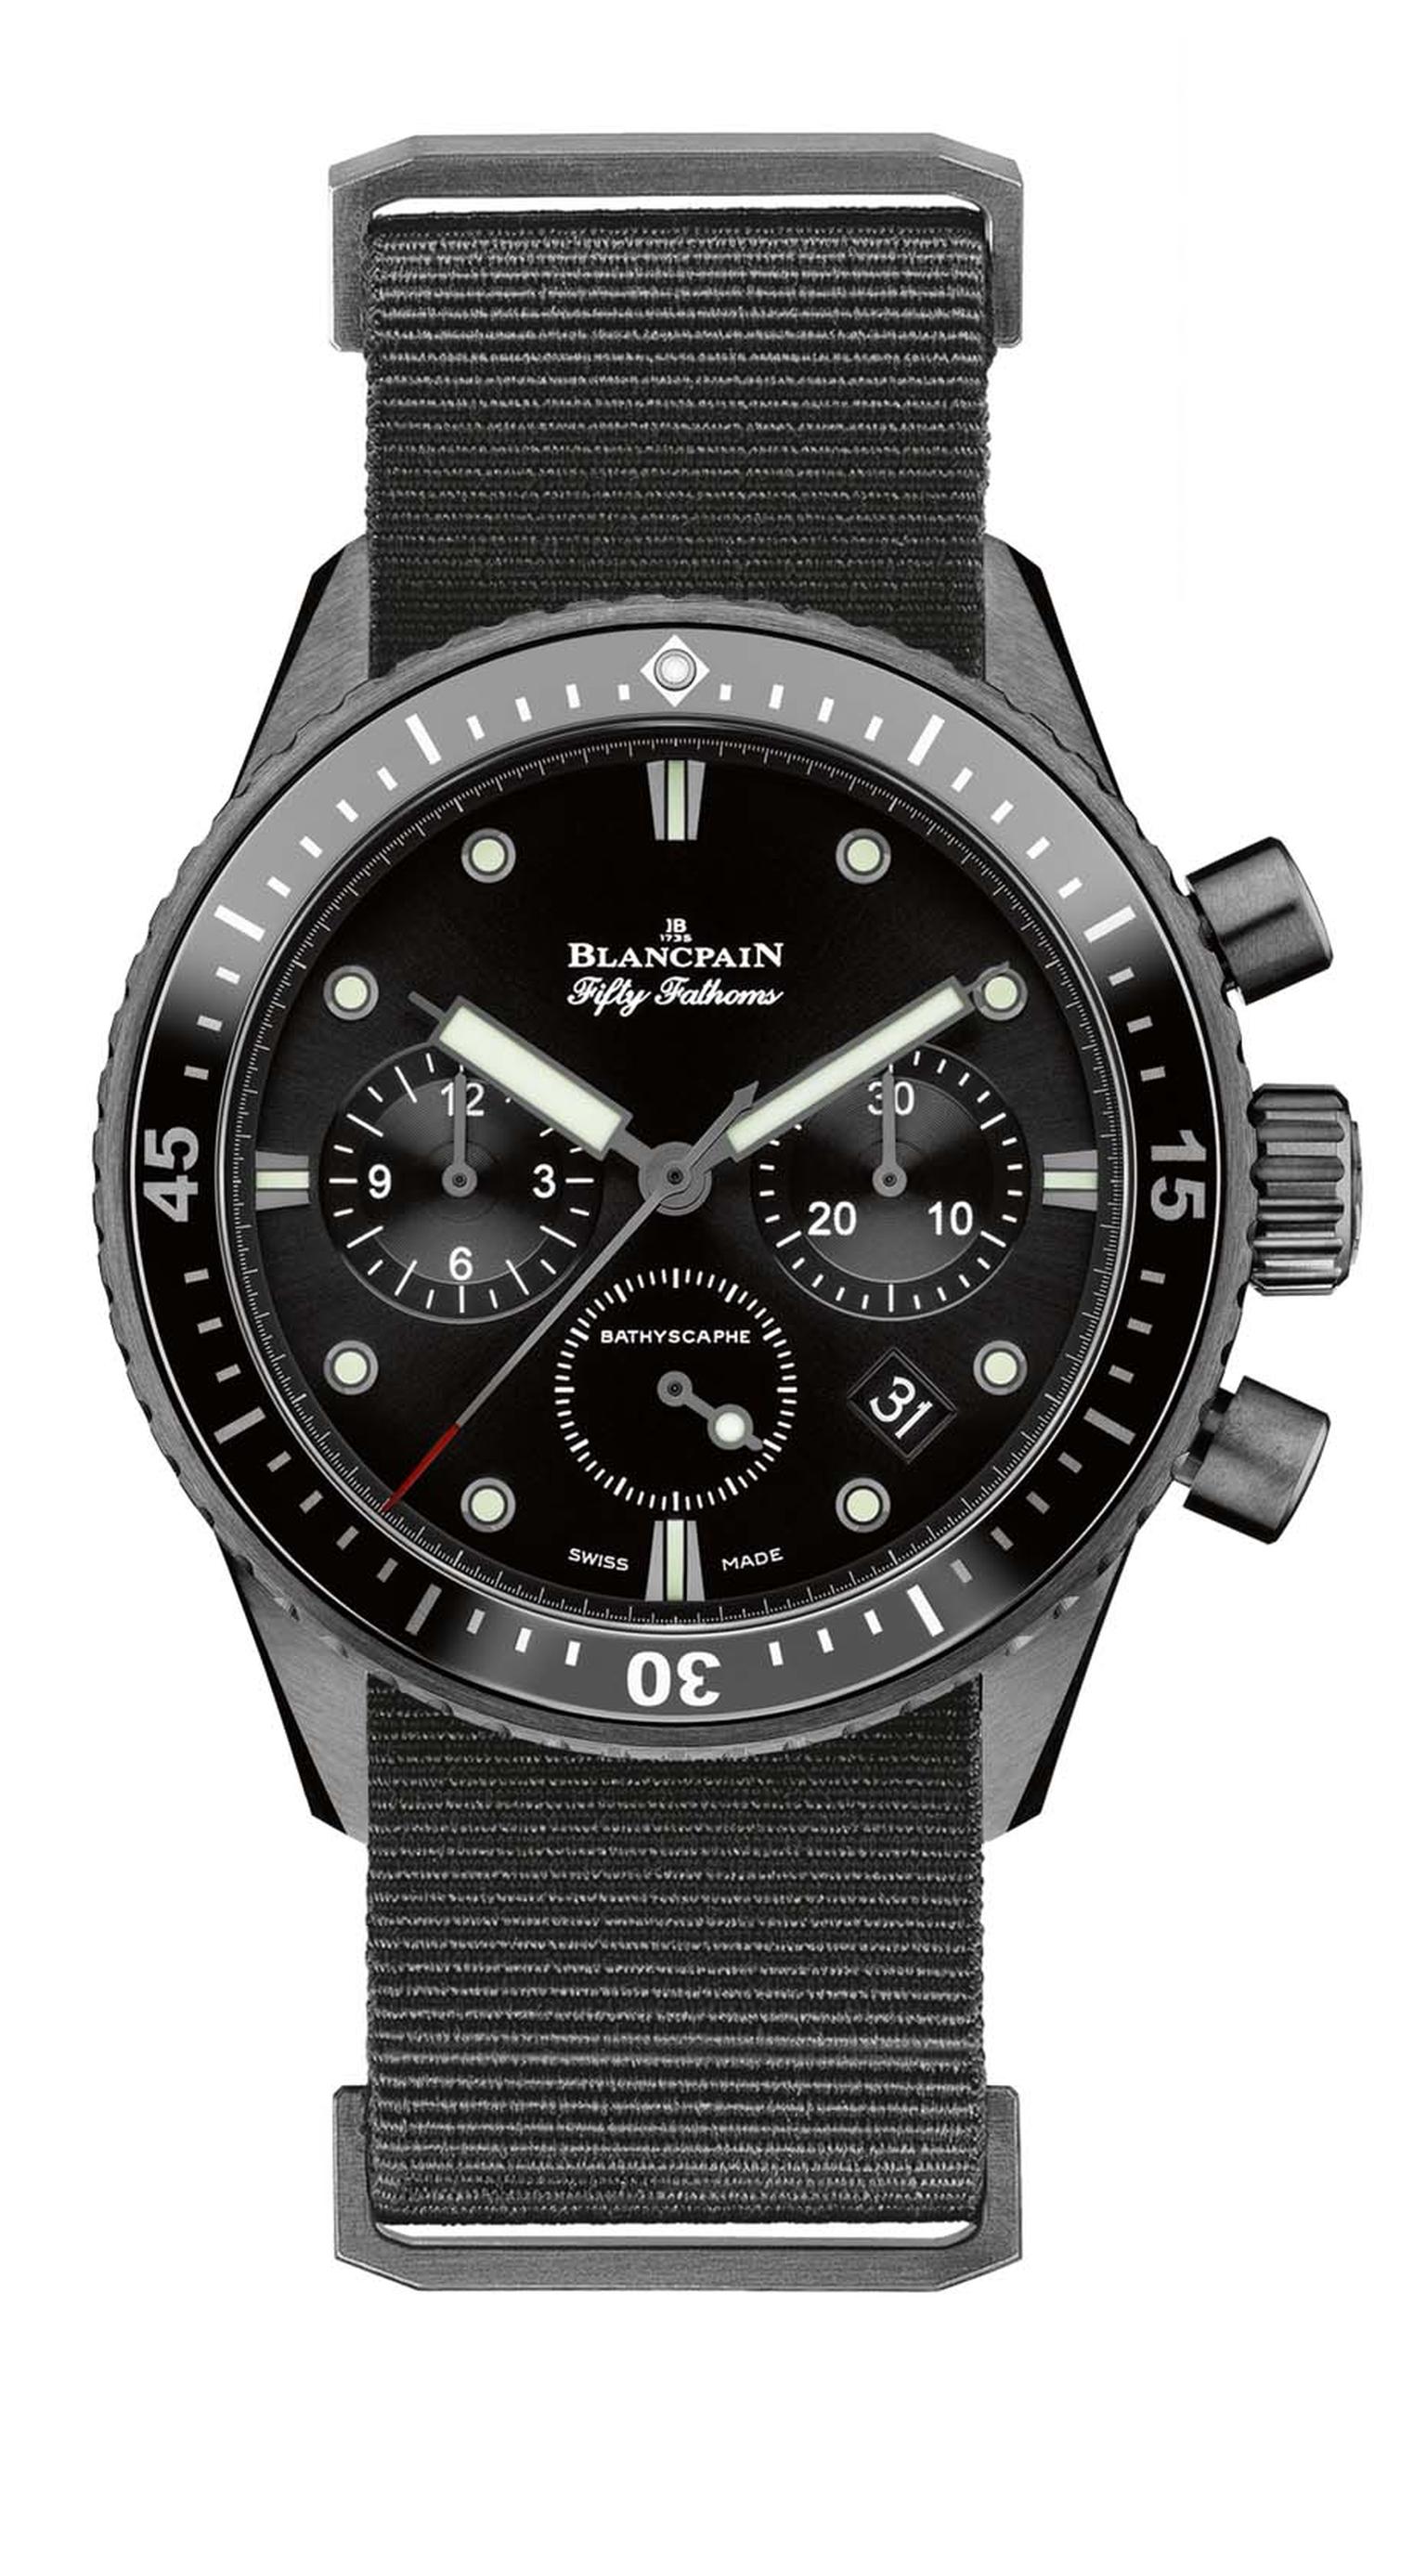 The Blancpain Fifty Fathoms Bathyscaphe was launched this year with a sophisticated flyback chronograph. The 43mm brushed black ceramic model, which offers superior scratch-resistance, is capable of braving depths of 300m.